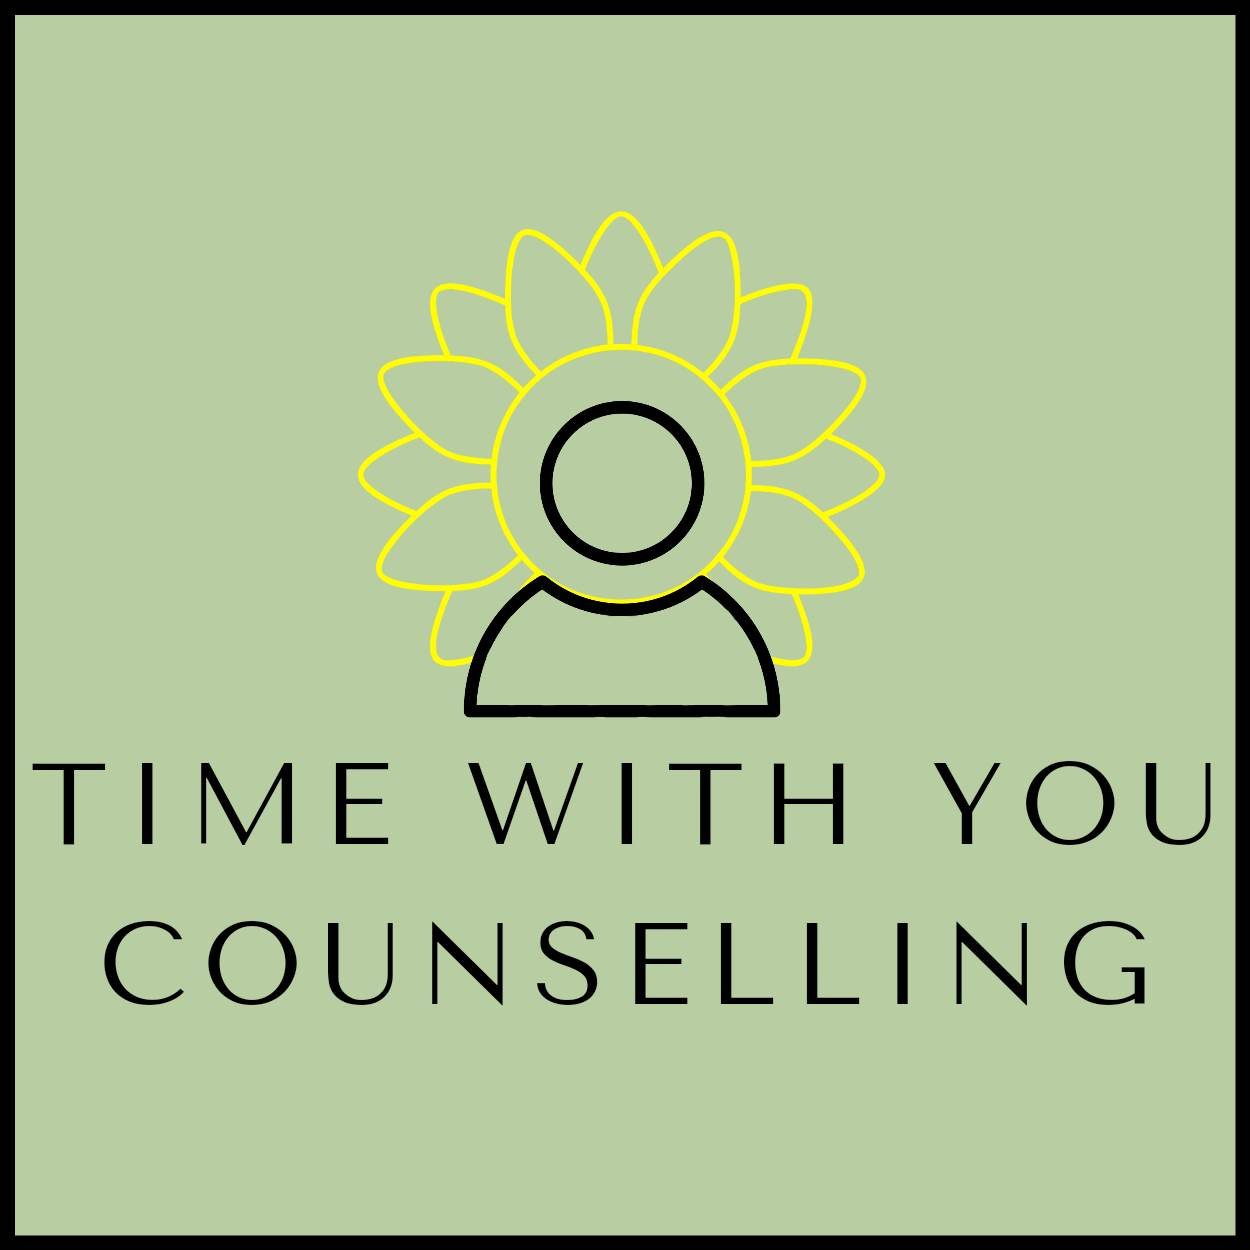 Time With You counselling